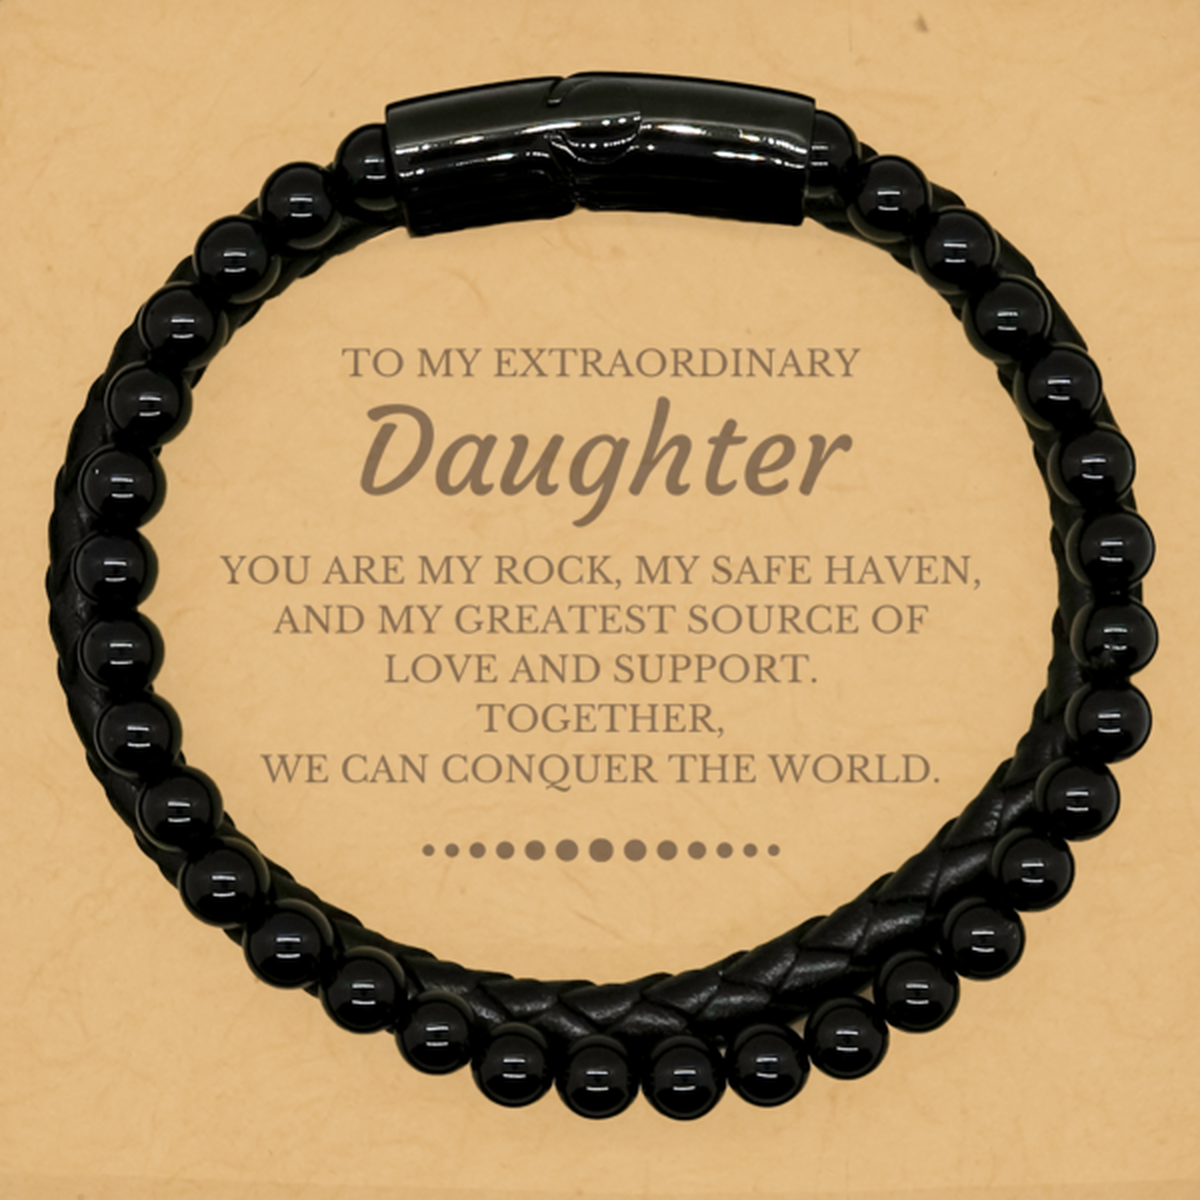 To My Extraordinary Daughter Gifts, Together, we can conquer the world, Birthday Stone Leather Bracelets For Daughter, Christmas Gifts For Daughter